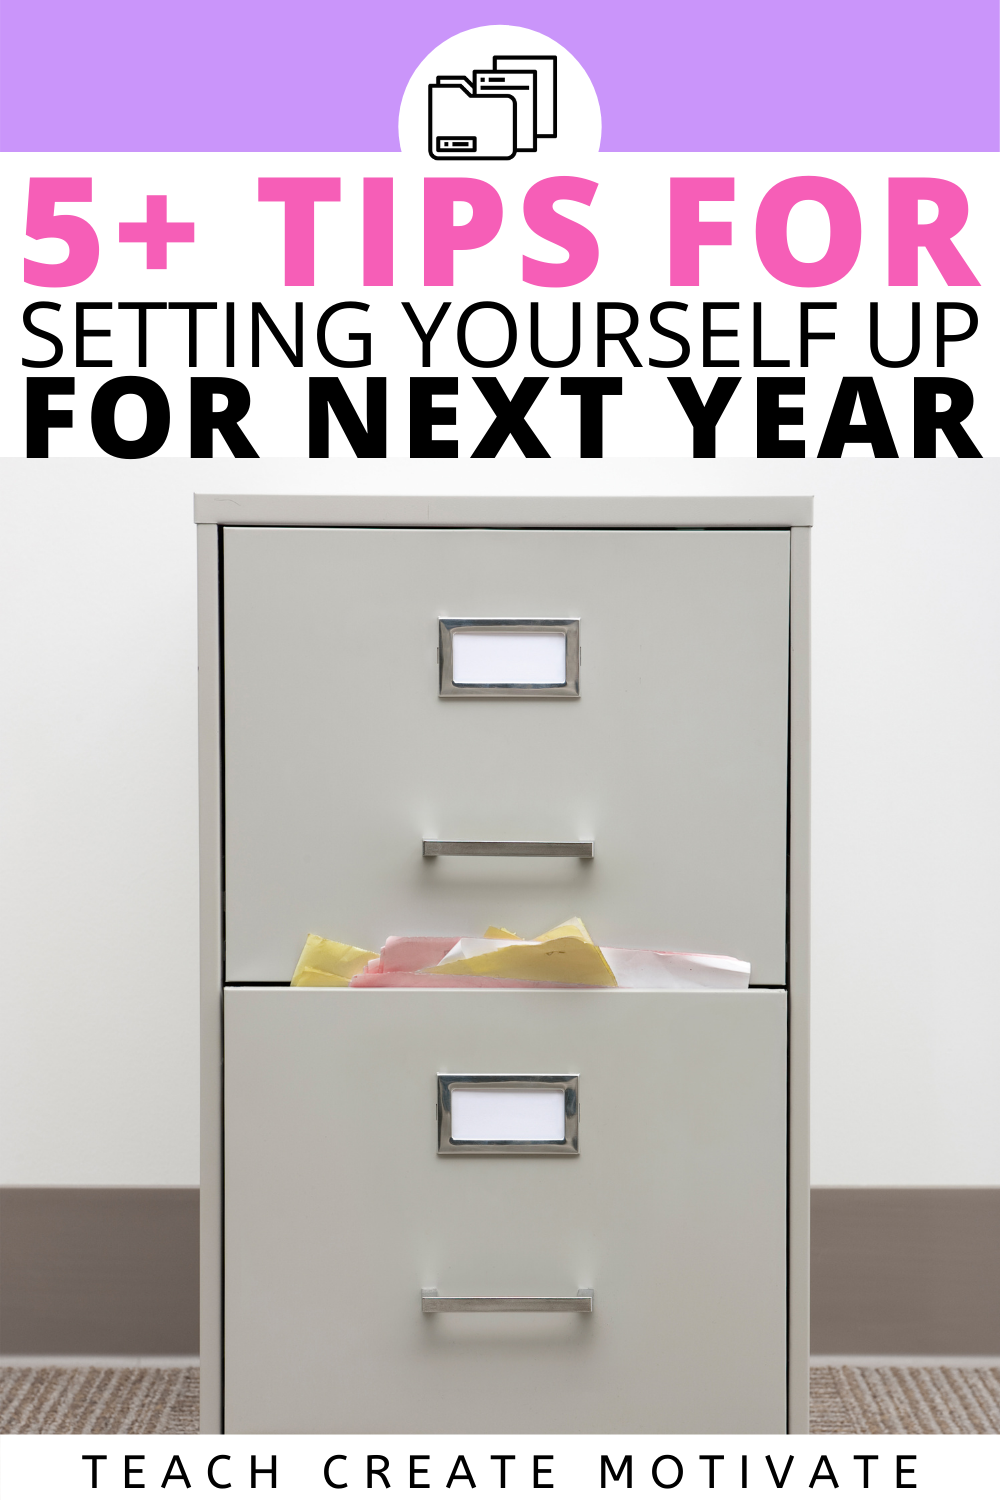 As your school year wraps up, here are some tips for how to organize yourself and get your classroom ready for next year!